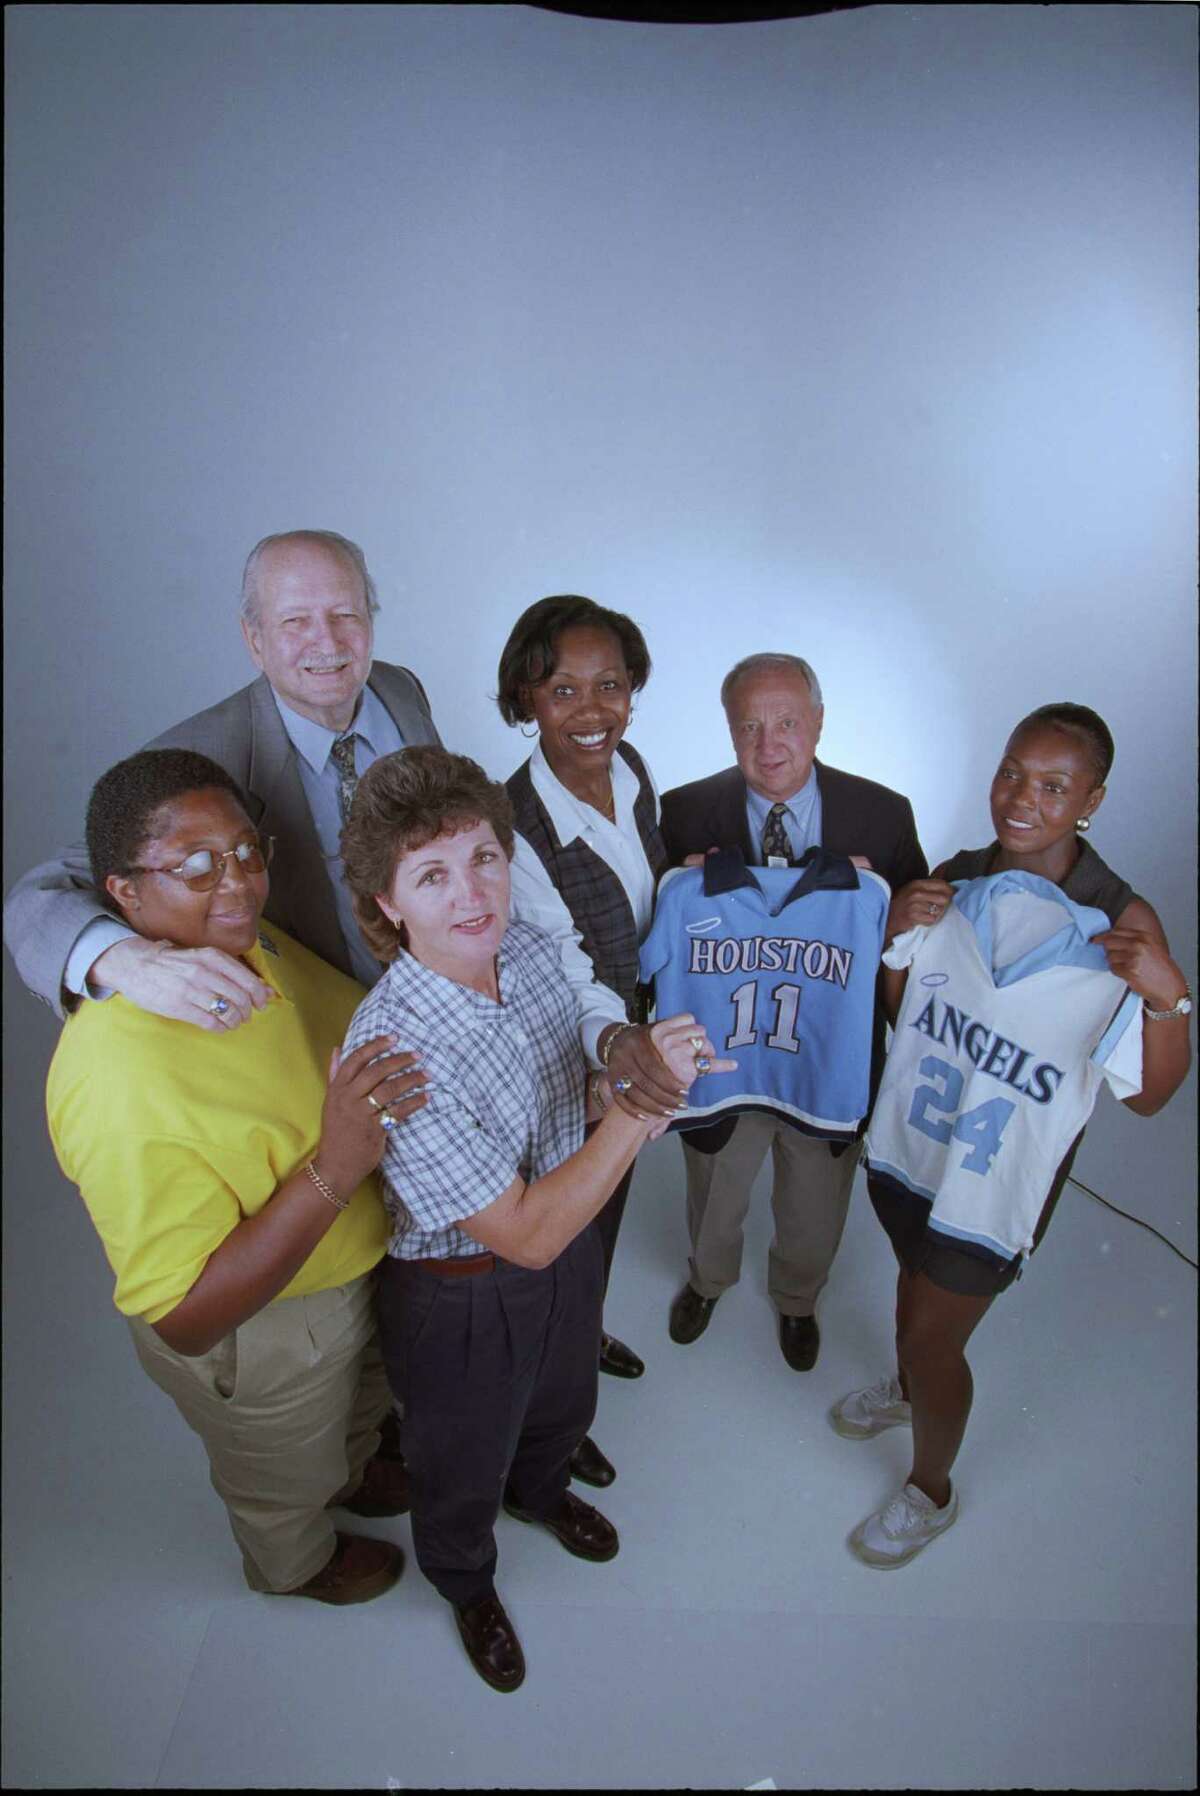 (8/3/00) Houston Angels of the Womesn's Professional Basketball League WBL won the inaugural championship in 1979. L-R: Sylvia Anderson; Hugh Sweeney (owner); Karen (Aulenbacher) Heinz; Belinda (Candler) Copeland; Coach Don Knodel; and Cynthia (Washington) Richburg....(Karen Warren/Houston Chronicle) HOUCHRON CAPTION (08/06/2000): Angel faces: From left are Sylvia Anderson, owner Hugh Sweeney, Karen Heintz, Belinda Copeland, coach Don Knodel and Cynthia Richburg.